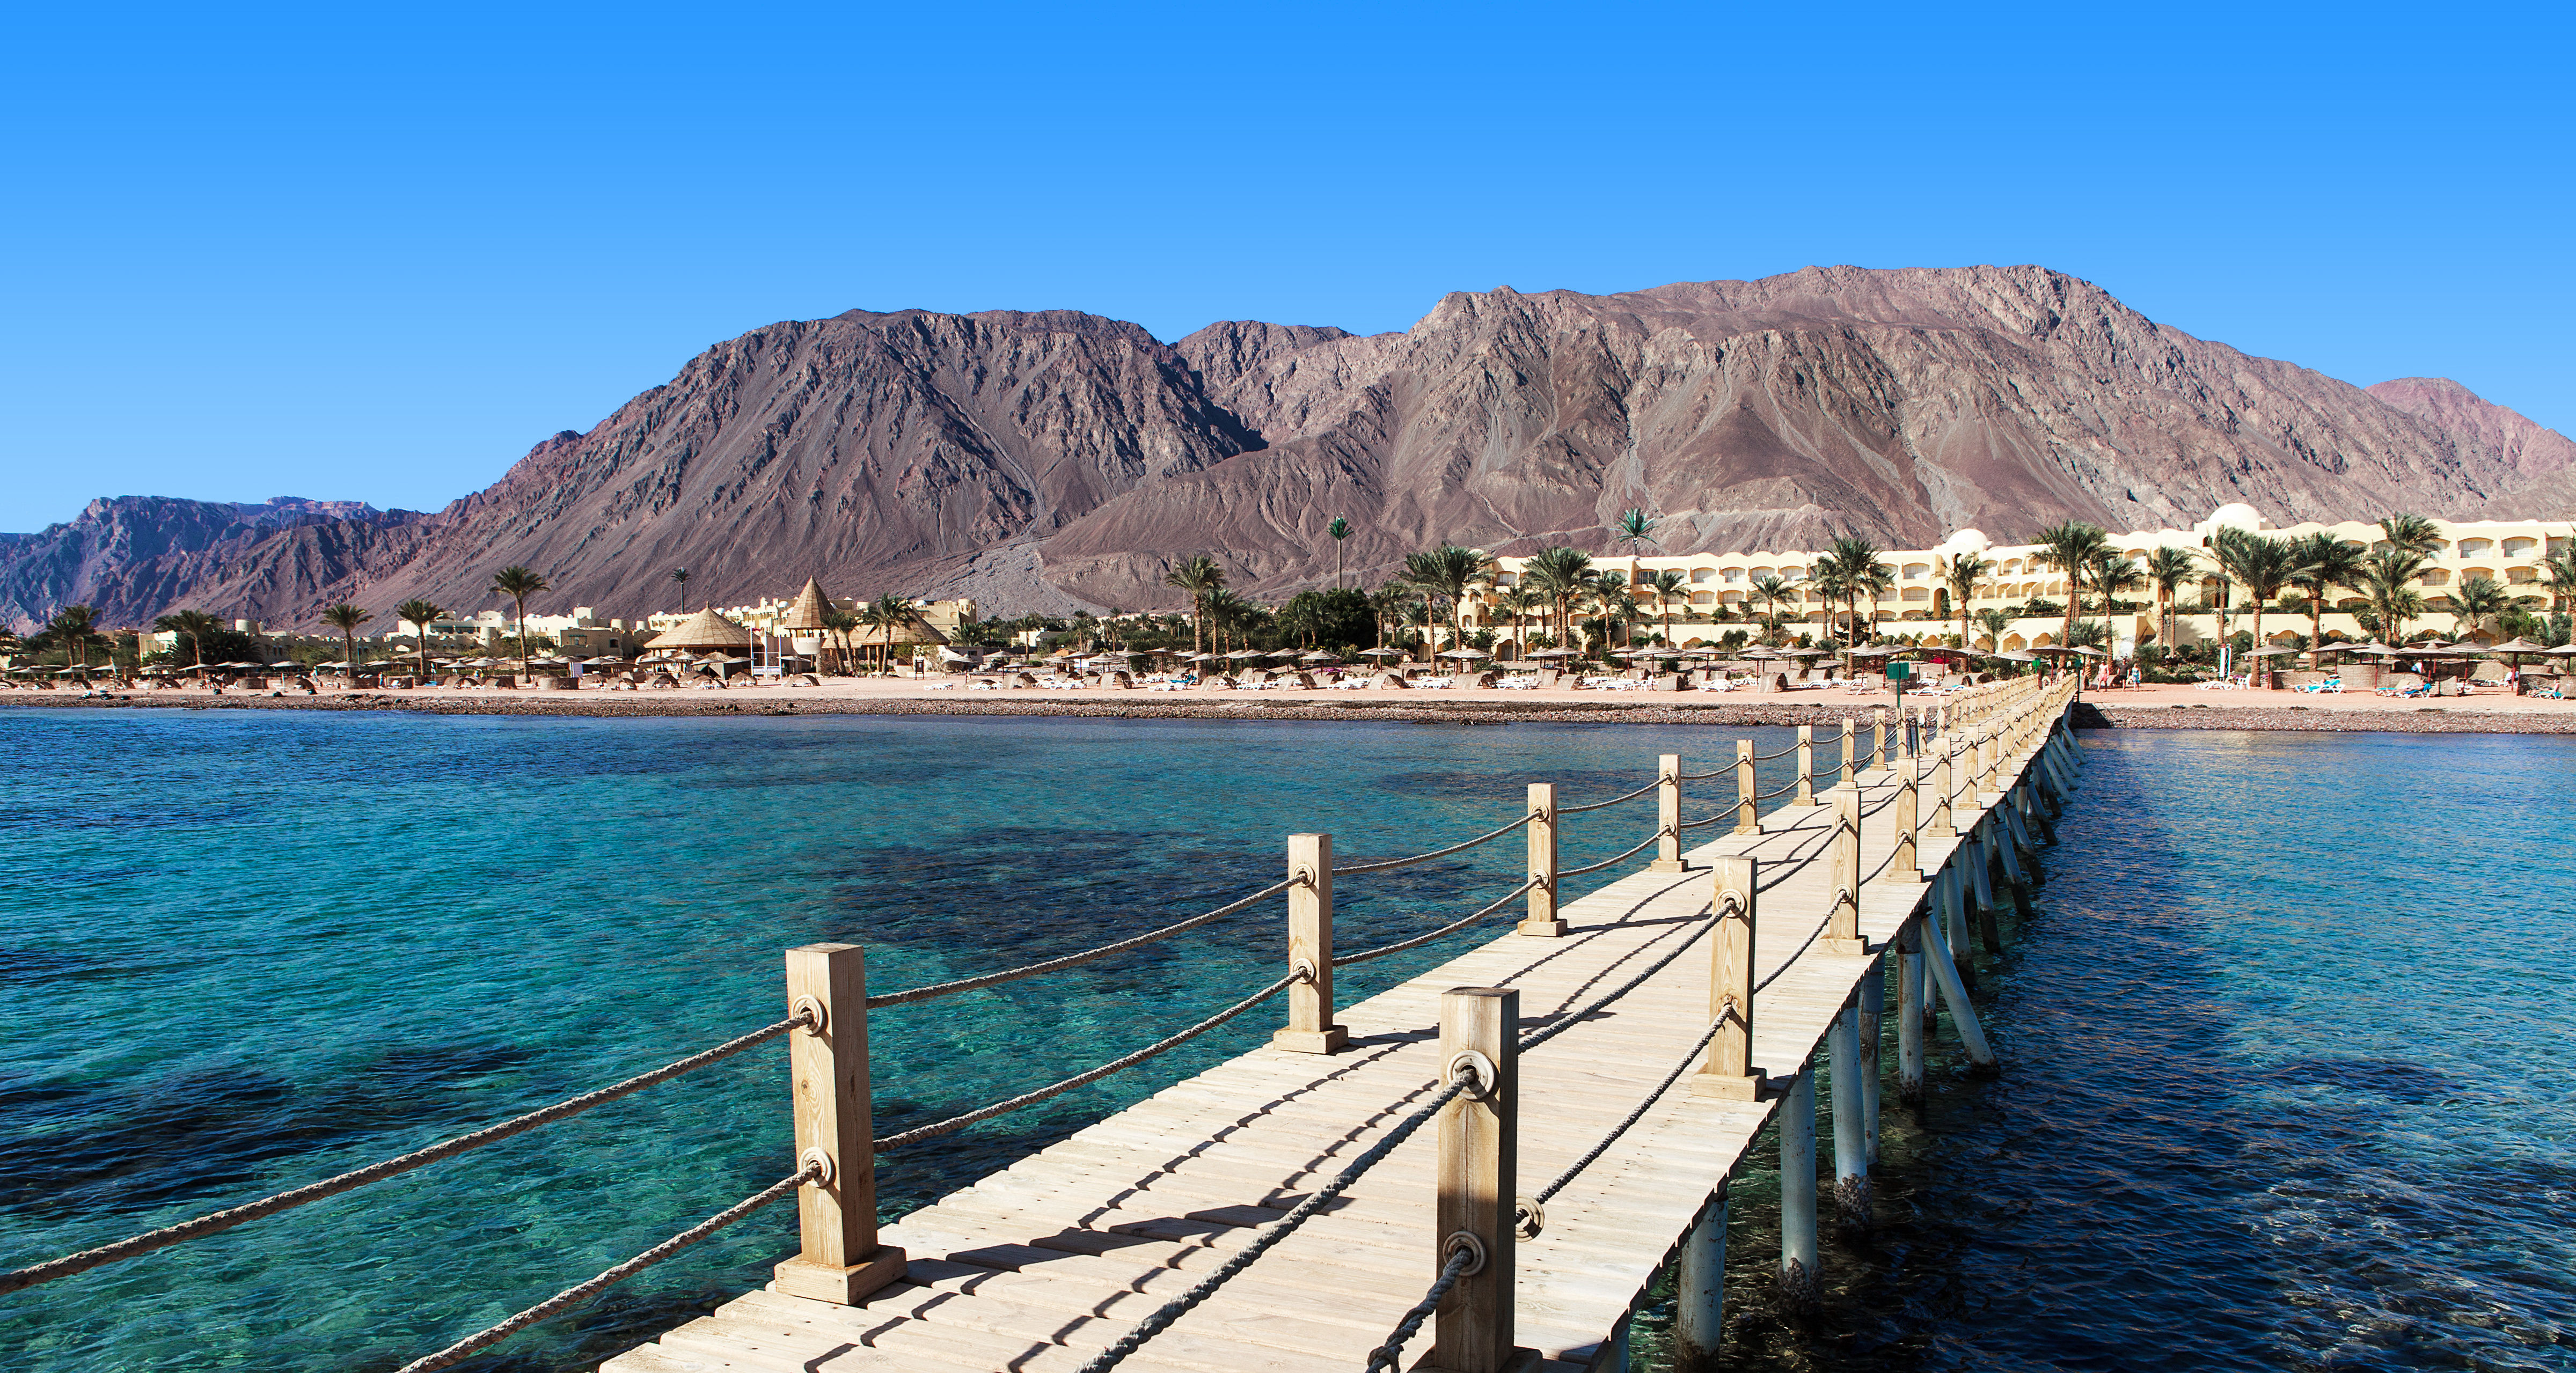 Pier over Red Sea reef with beach resort and mountain backdrop in Dahab Egypt.